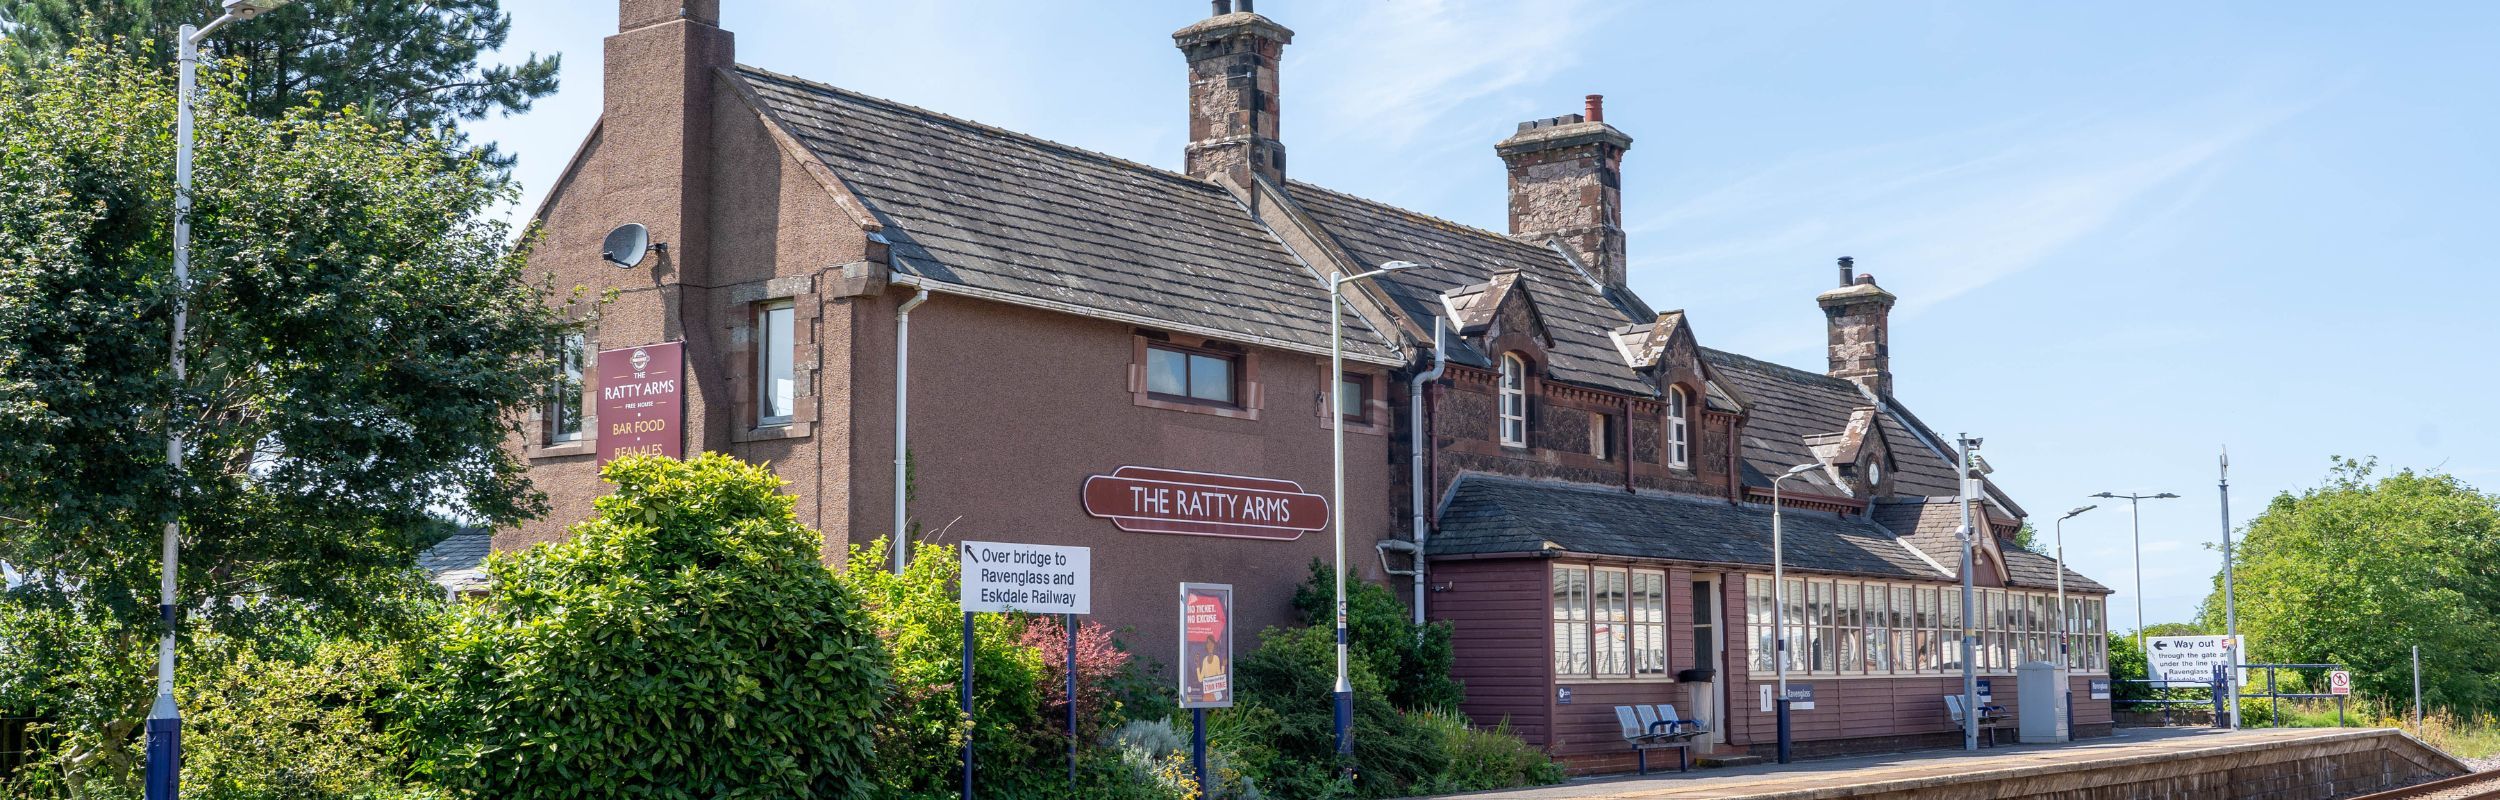 The Ratty Arms Pub on the mainline train station at Ravenglass